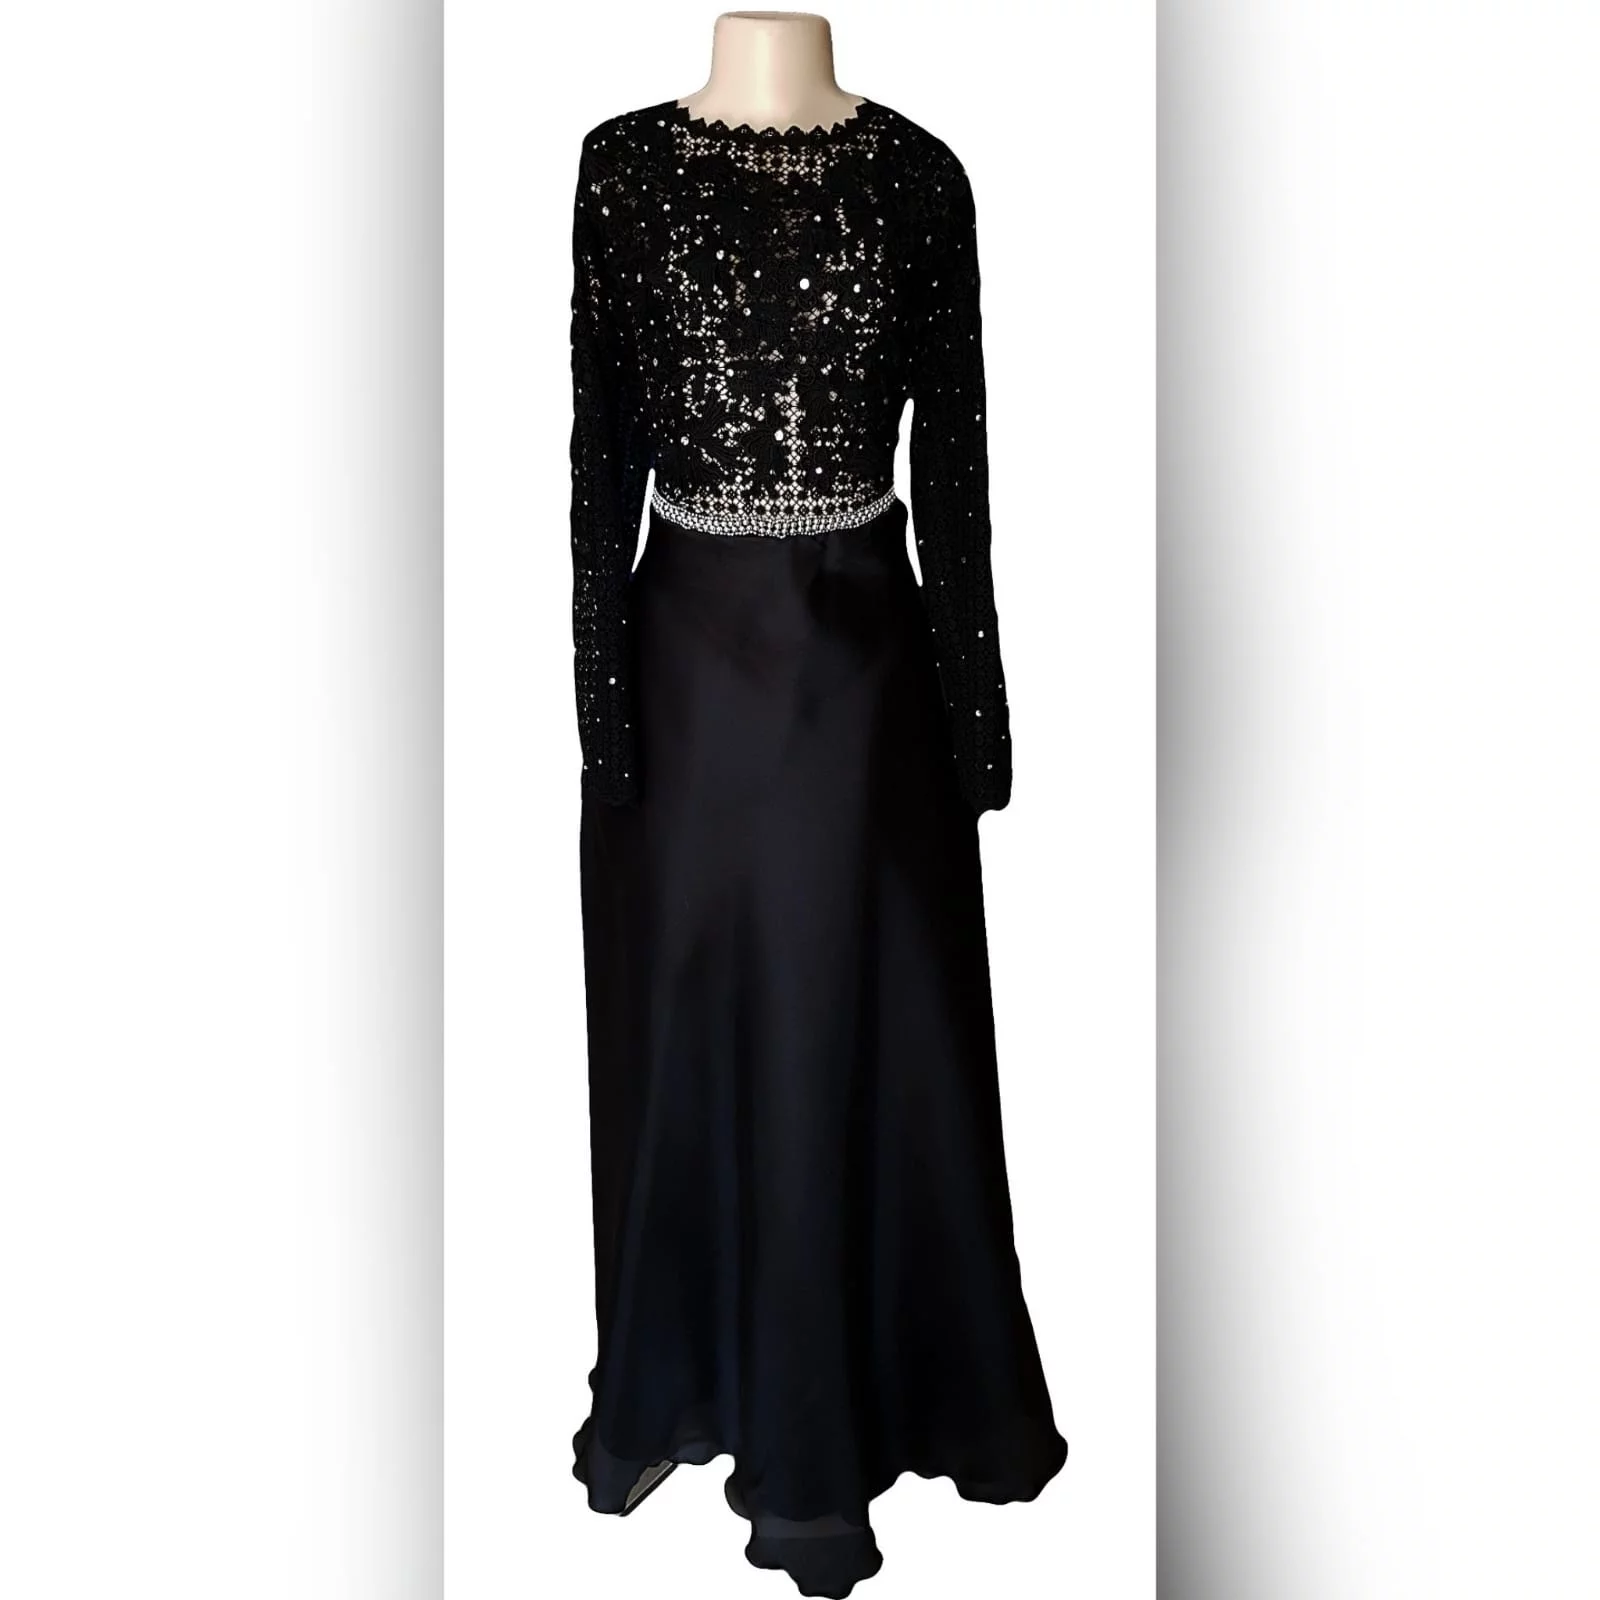 Black prom dress with a lace bodice 8 an elegant design created for a prom night. Black prom dress with a lace bodice with a slight sheer look detailed with silver beads and waist belt. Round neckline and long sleeves bottom flowy in a bridal organza